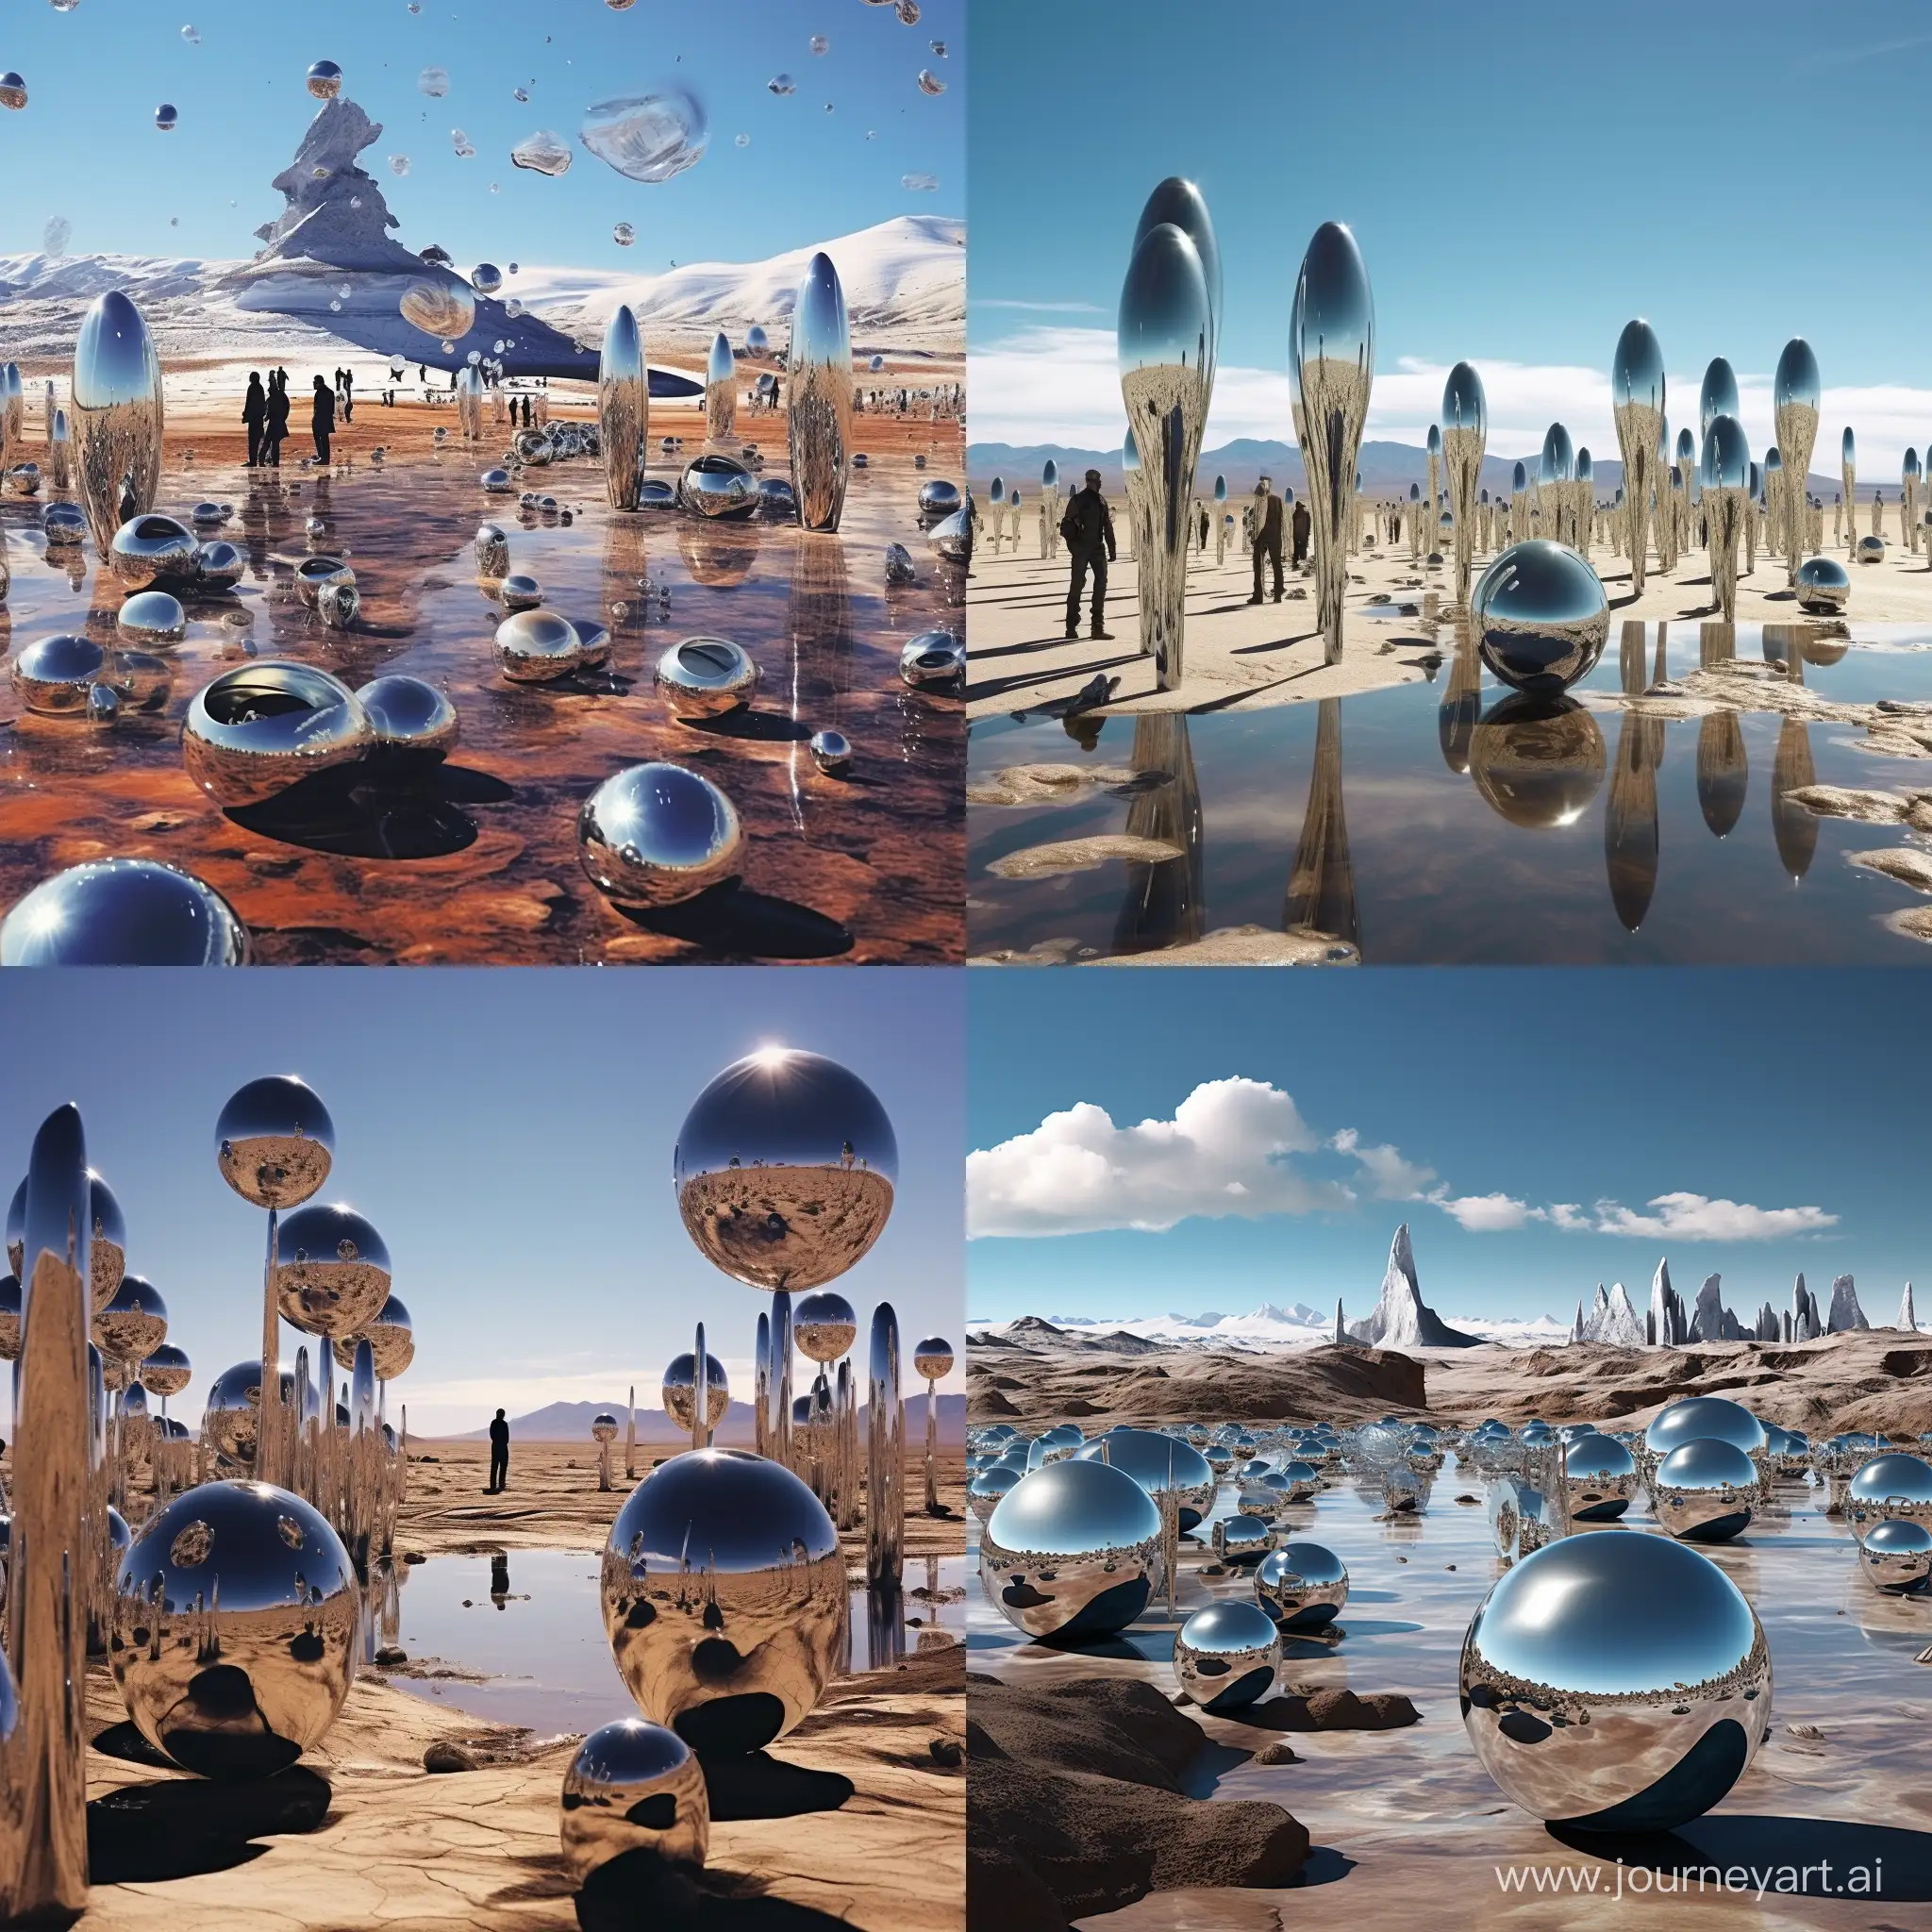 Surreal-Extraterrestrial-Landscape-with-Sparkling-Mirror-Figures